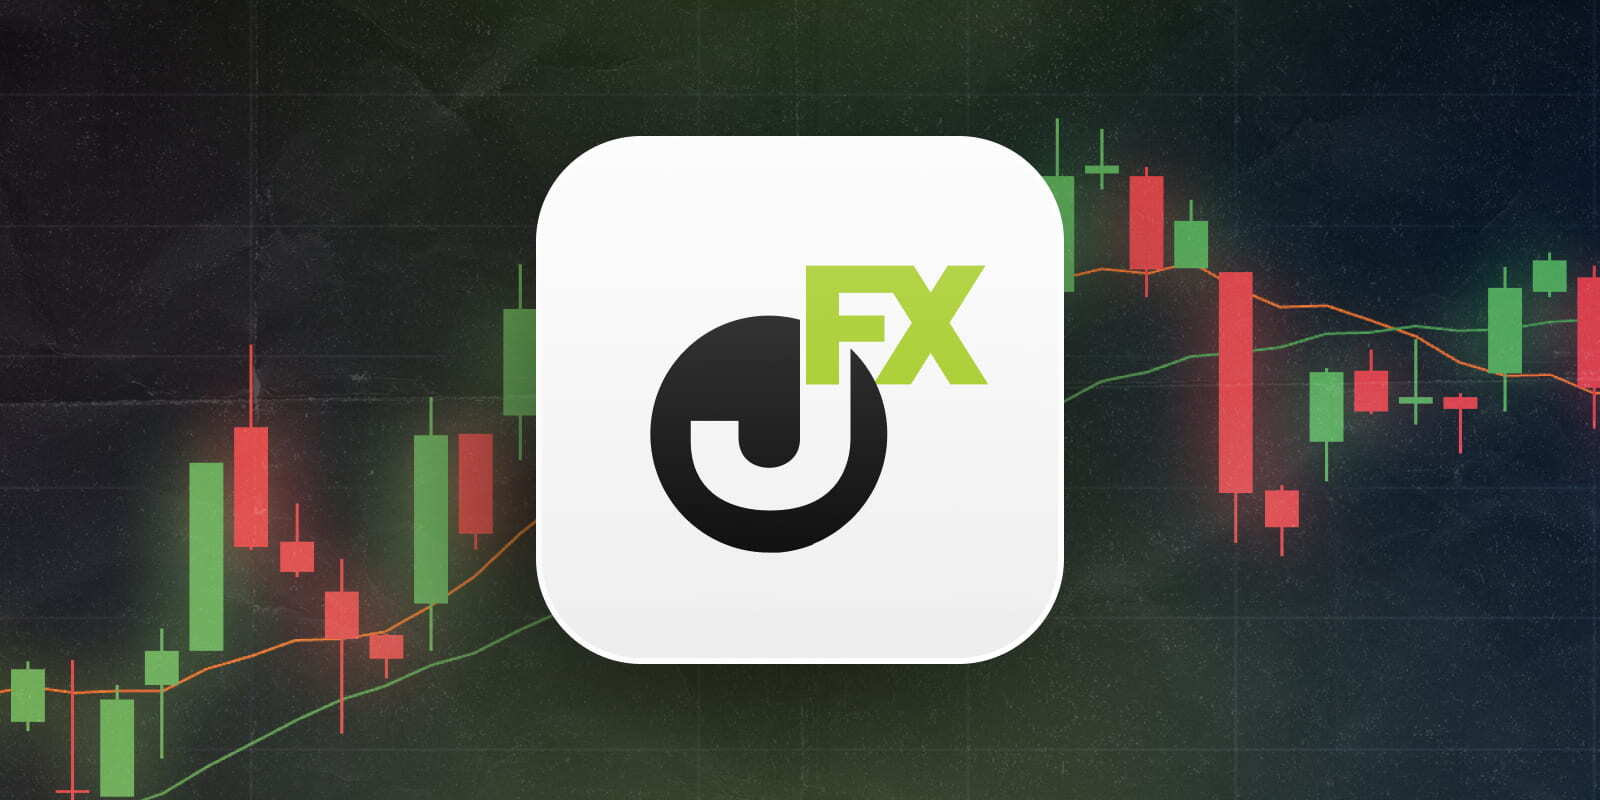 JFX forex data becomes accessible on TradingView